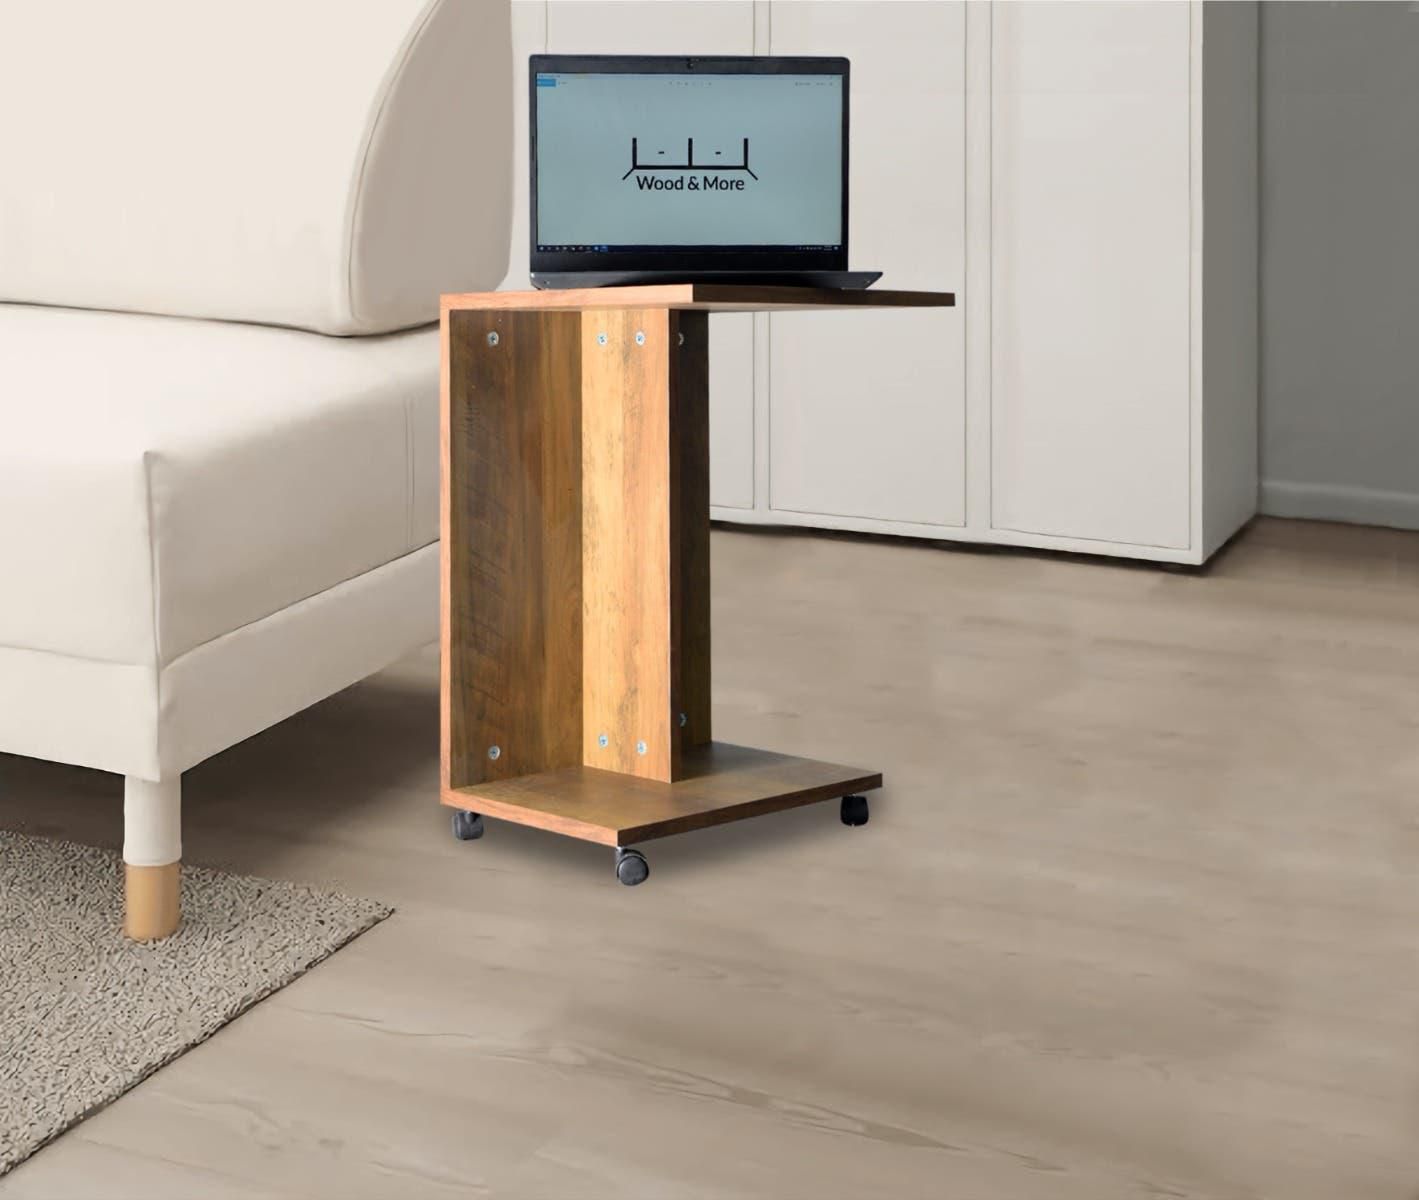 Get MDF Wood Side Table, 40×30×60 cm - Light Brown with best offers | Raneen.com